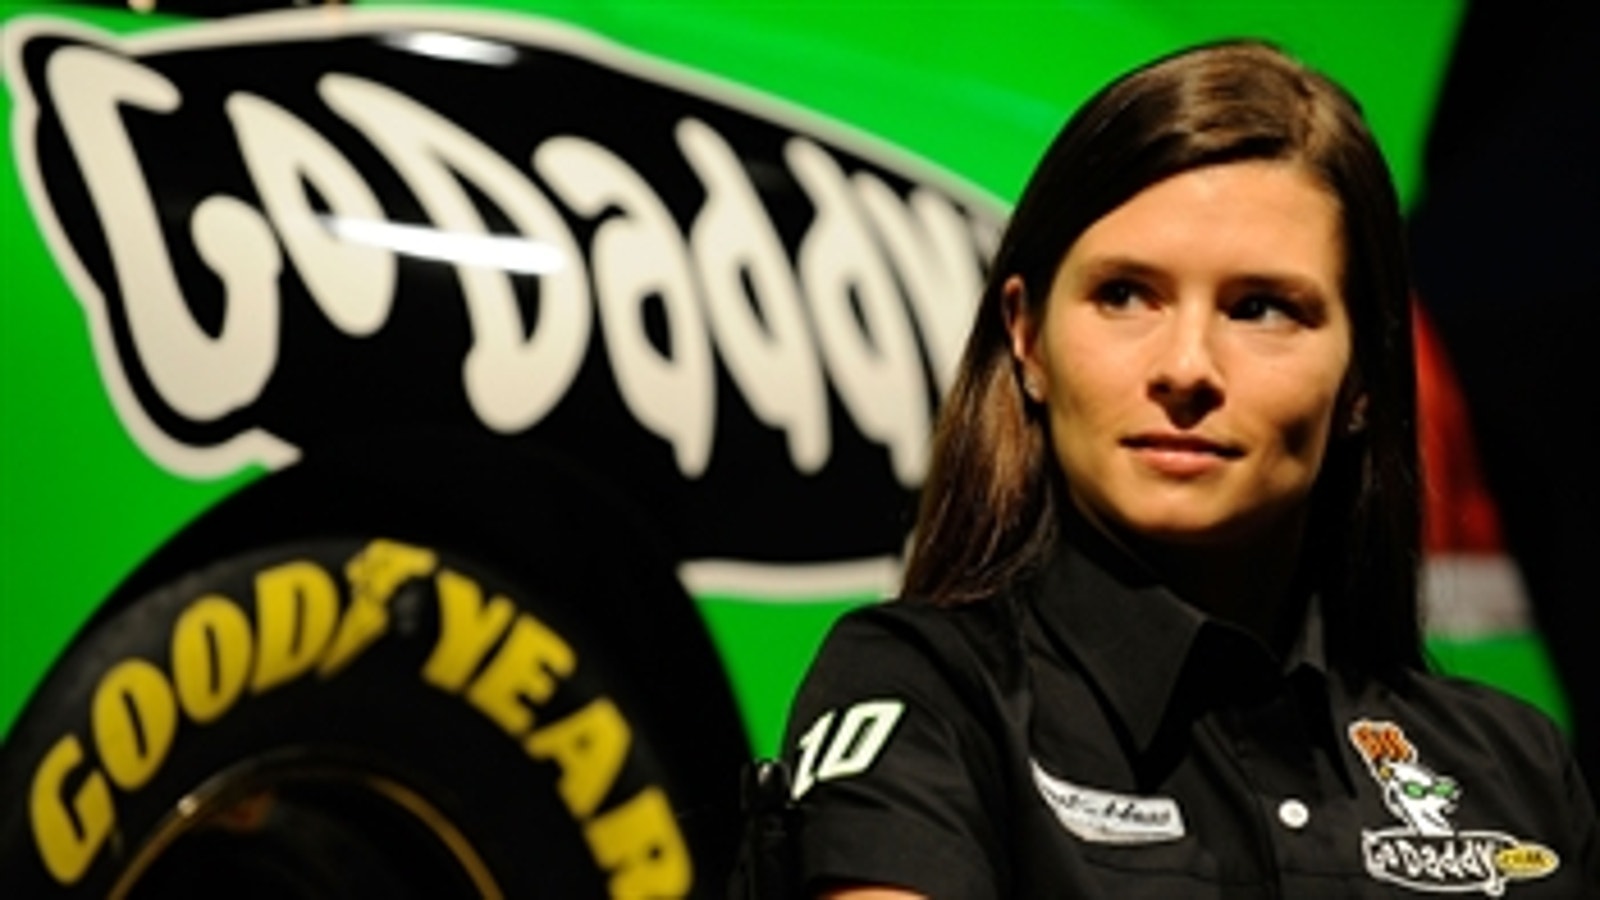 Thank you, Danica: Looking back at the historic career of NASCAR's most successful female driver